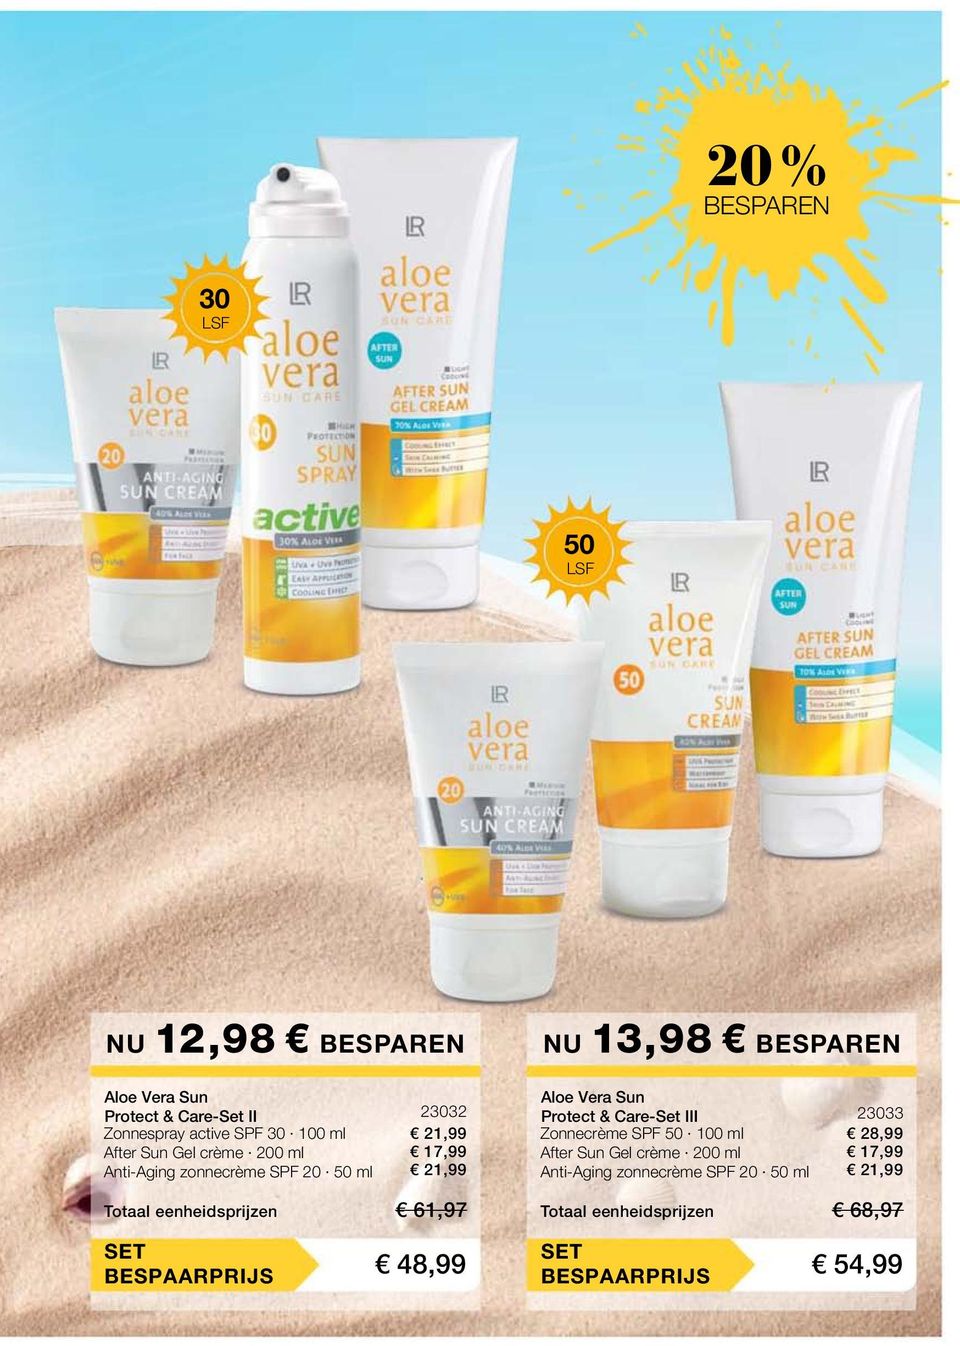 Protect & Care-Set III Zonnecrème SPF 50 100 ml After Sun Gel crème 200 ml Anti-Aging zonnecrème SPF 20 50 ml 23033